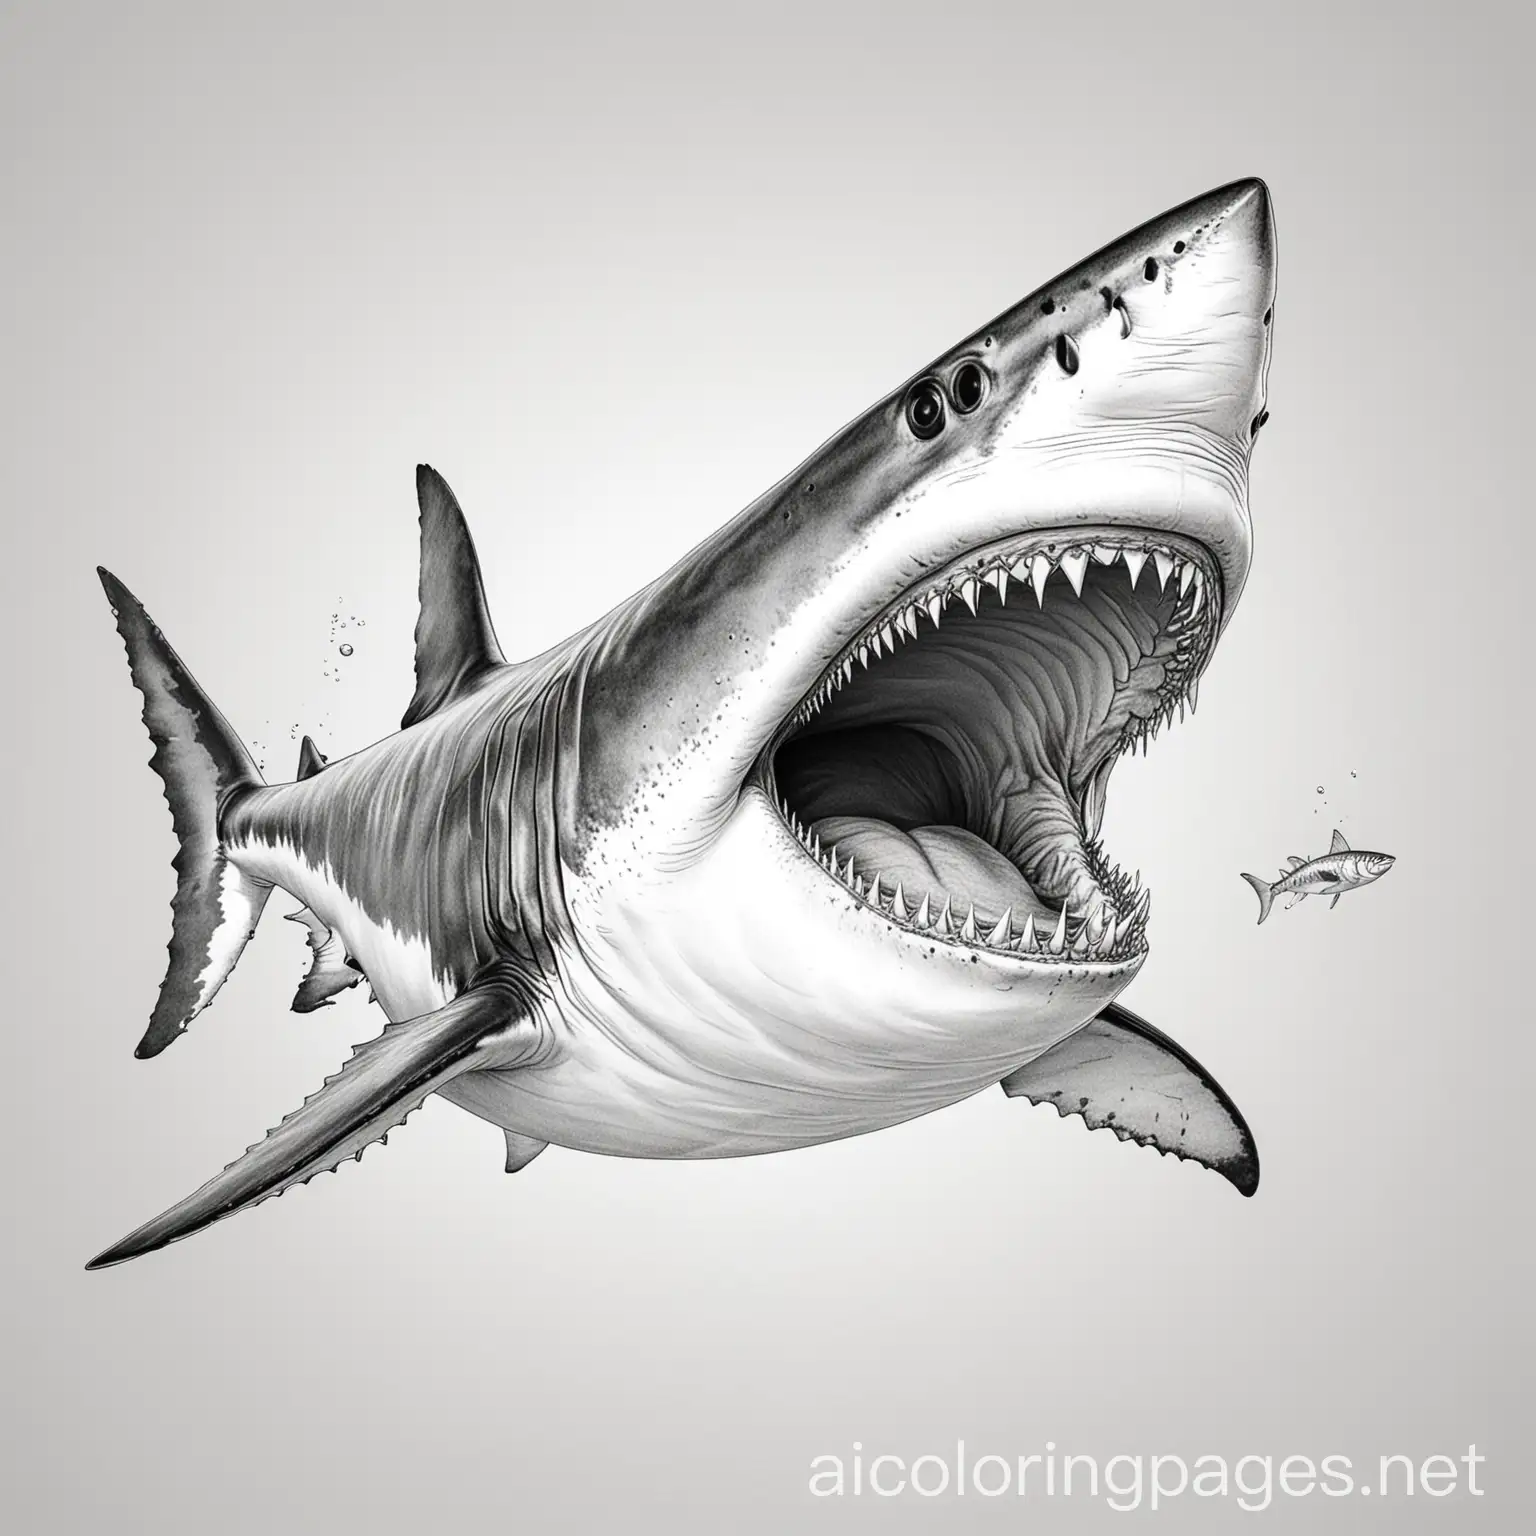 Great-White-Shark-and-Small-Fish-Swimming-Together-Coloring-Page